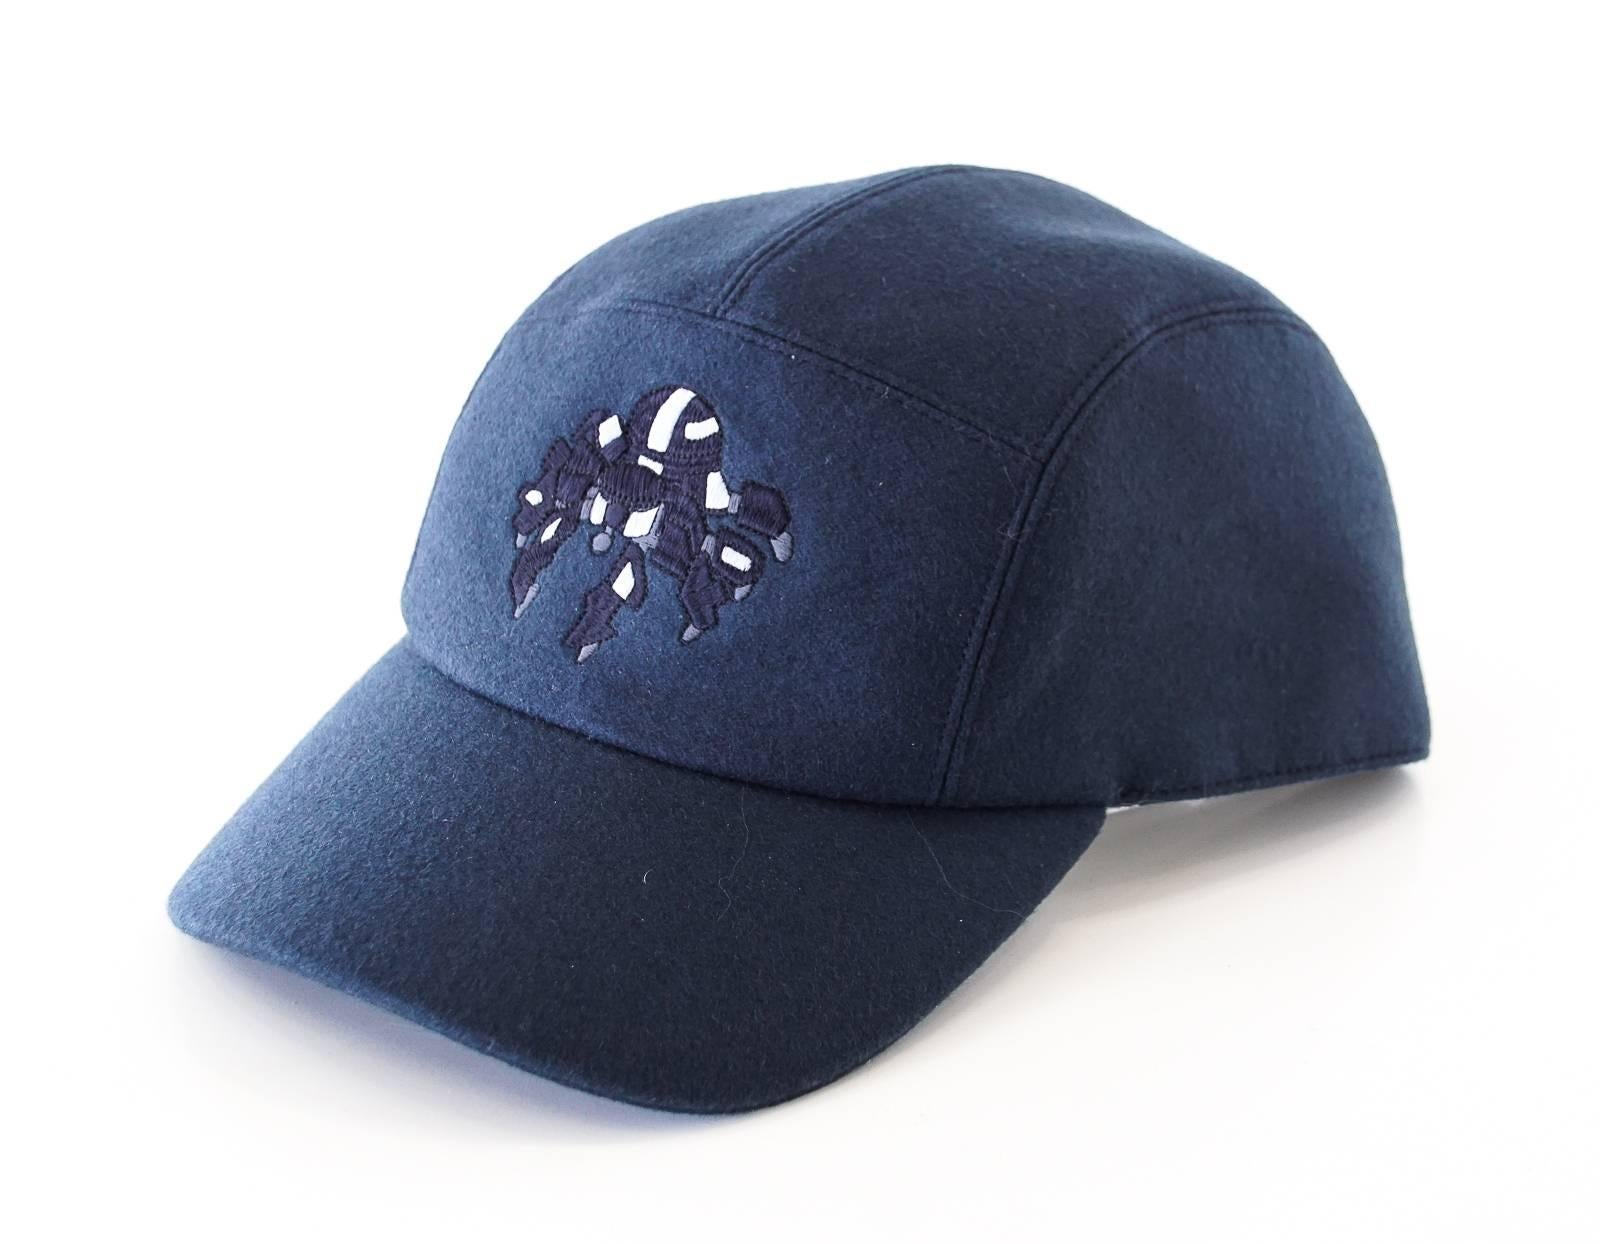 Mightychic offers an Hermes Limited Edition Spider Robot navy cashmere cap.  
The cap shows a blue and gray embroidered robotic spider across the center.
2 Hermes Paris Clou de Selle snaps at rear. 
Identical cap under separate listing in black size